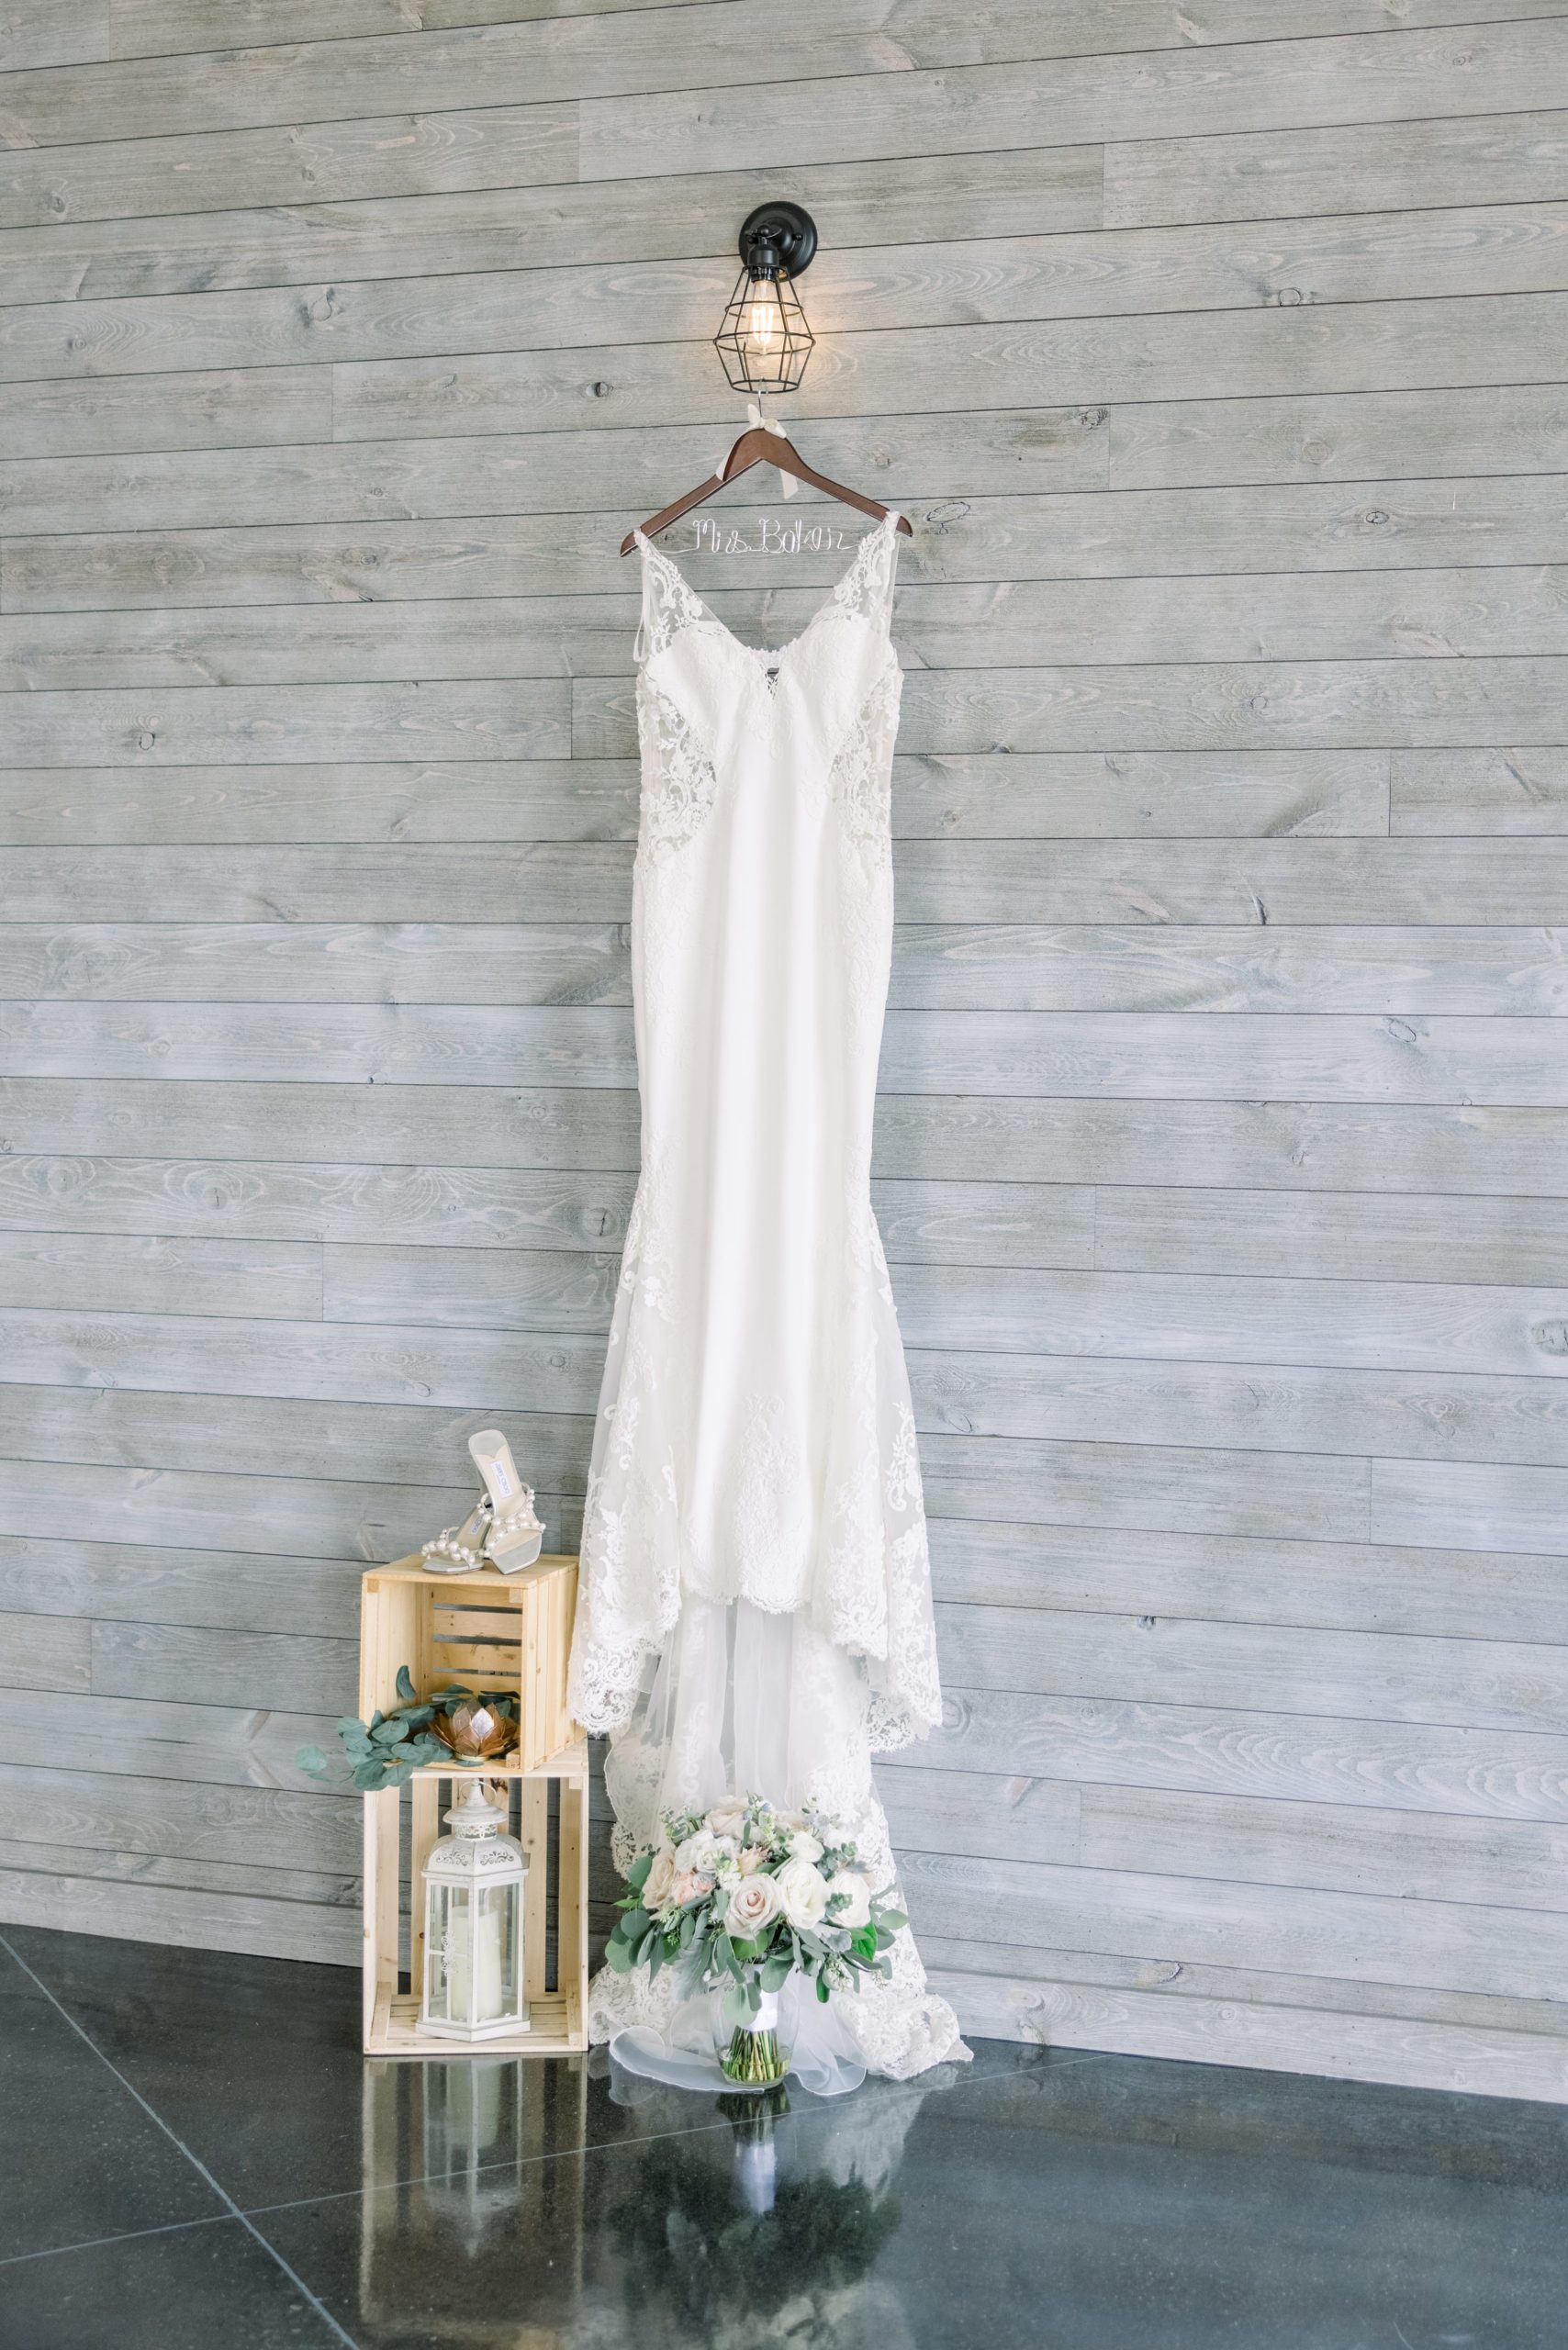 Bride's dress and bouquet for Boathouse on Lake Charlevoix wedding.